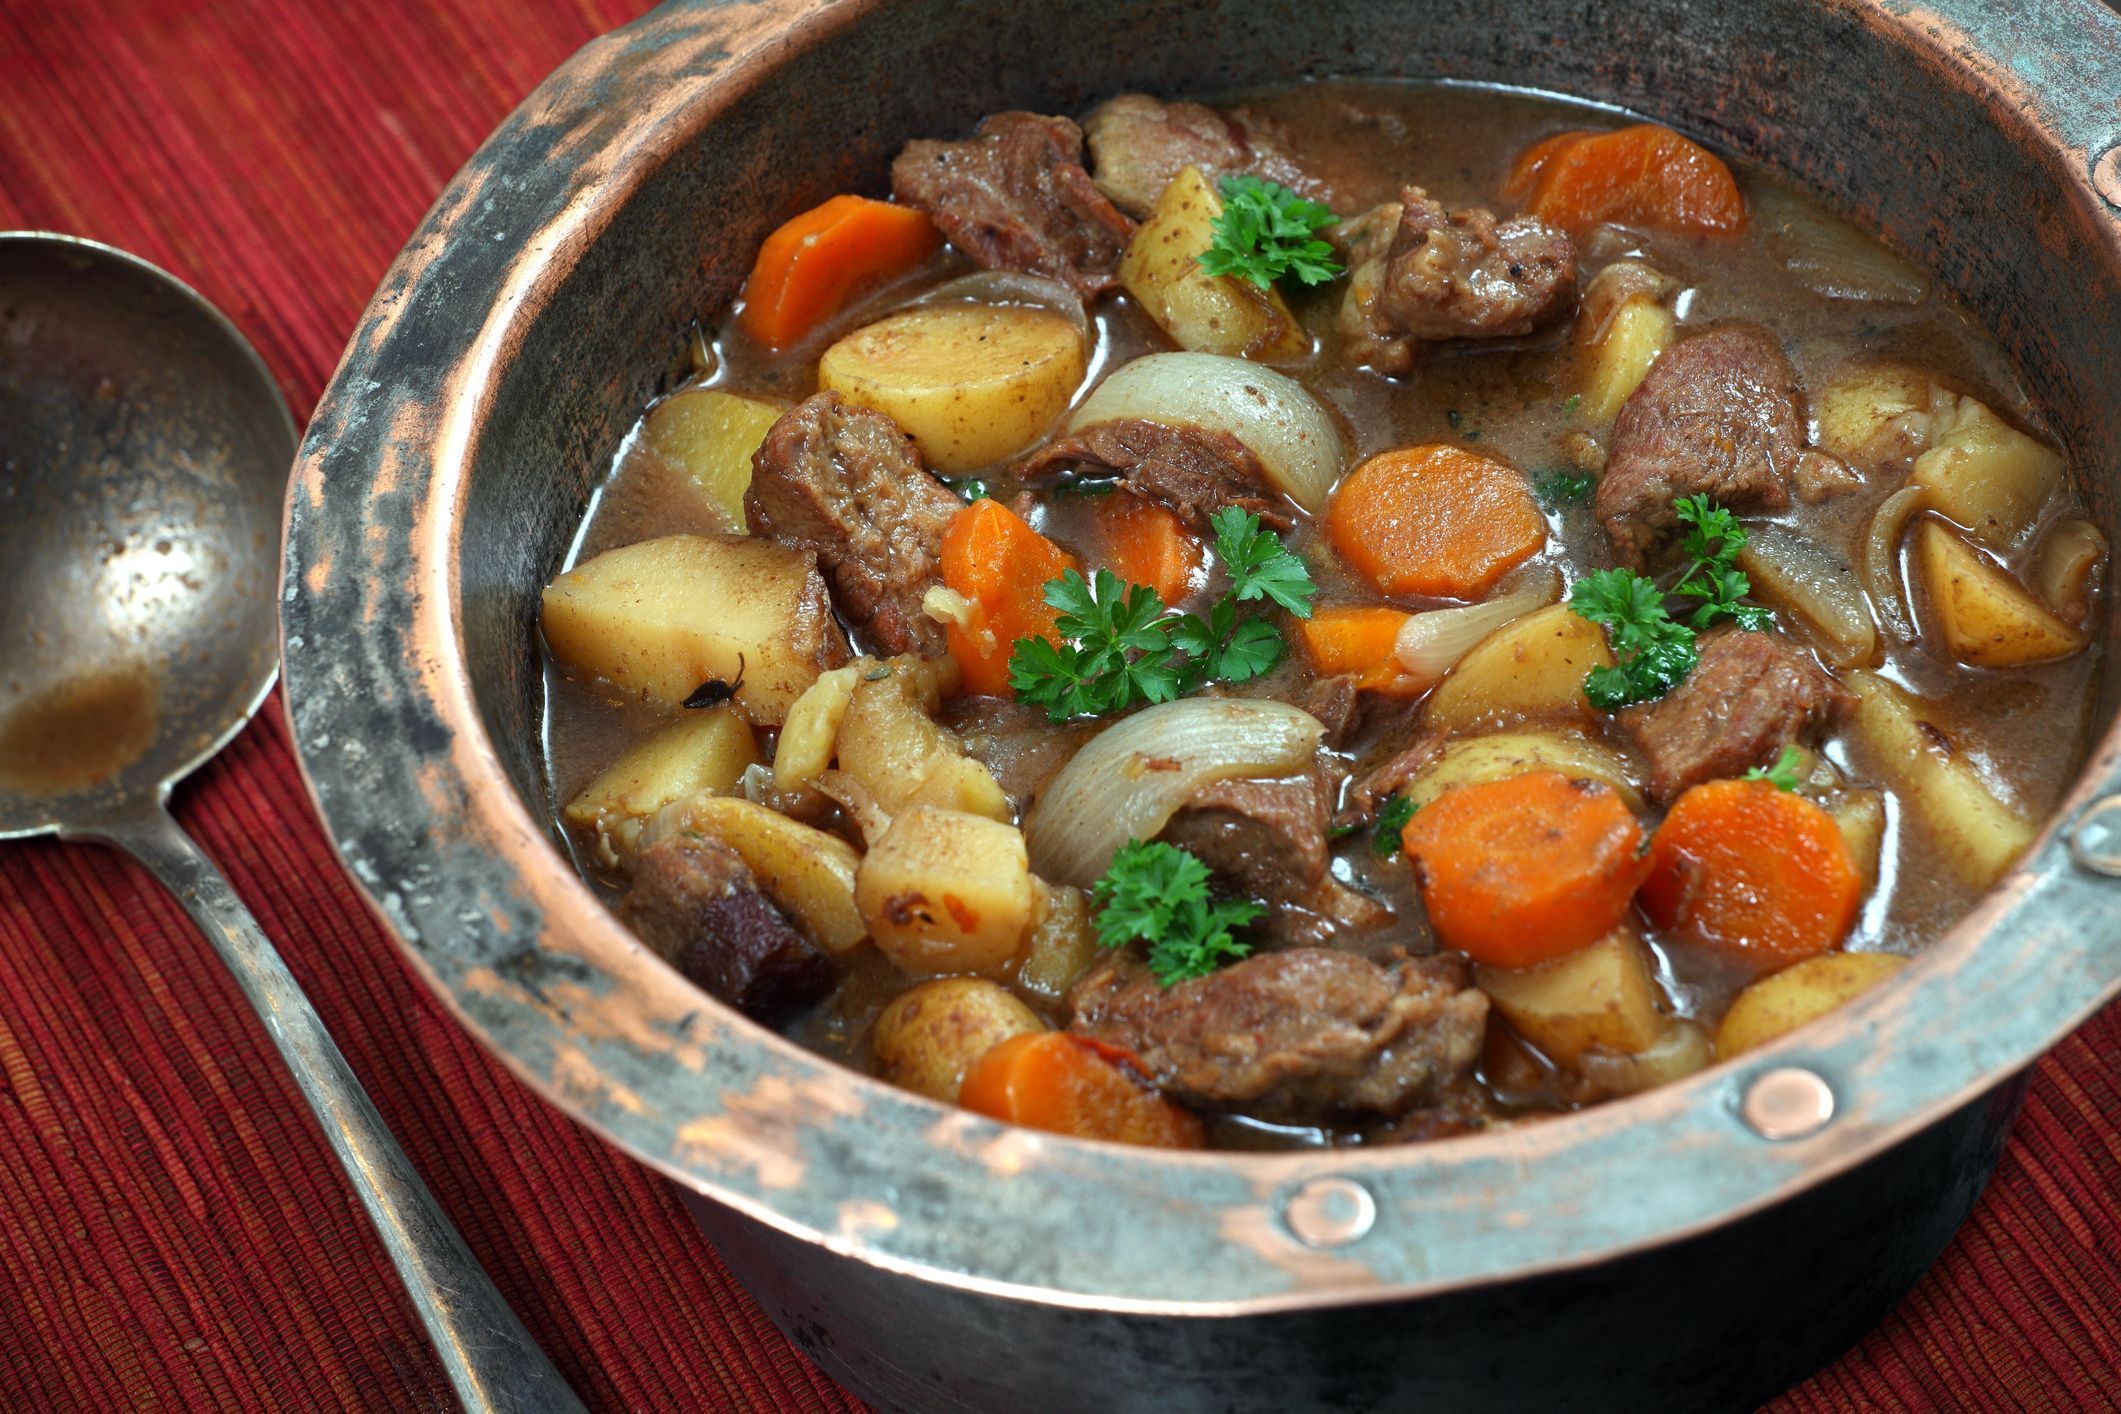 This slow cooker Irish stew recipe is perfect for cozy, chilly nights